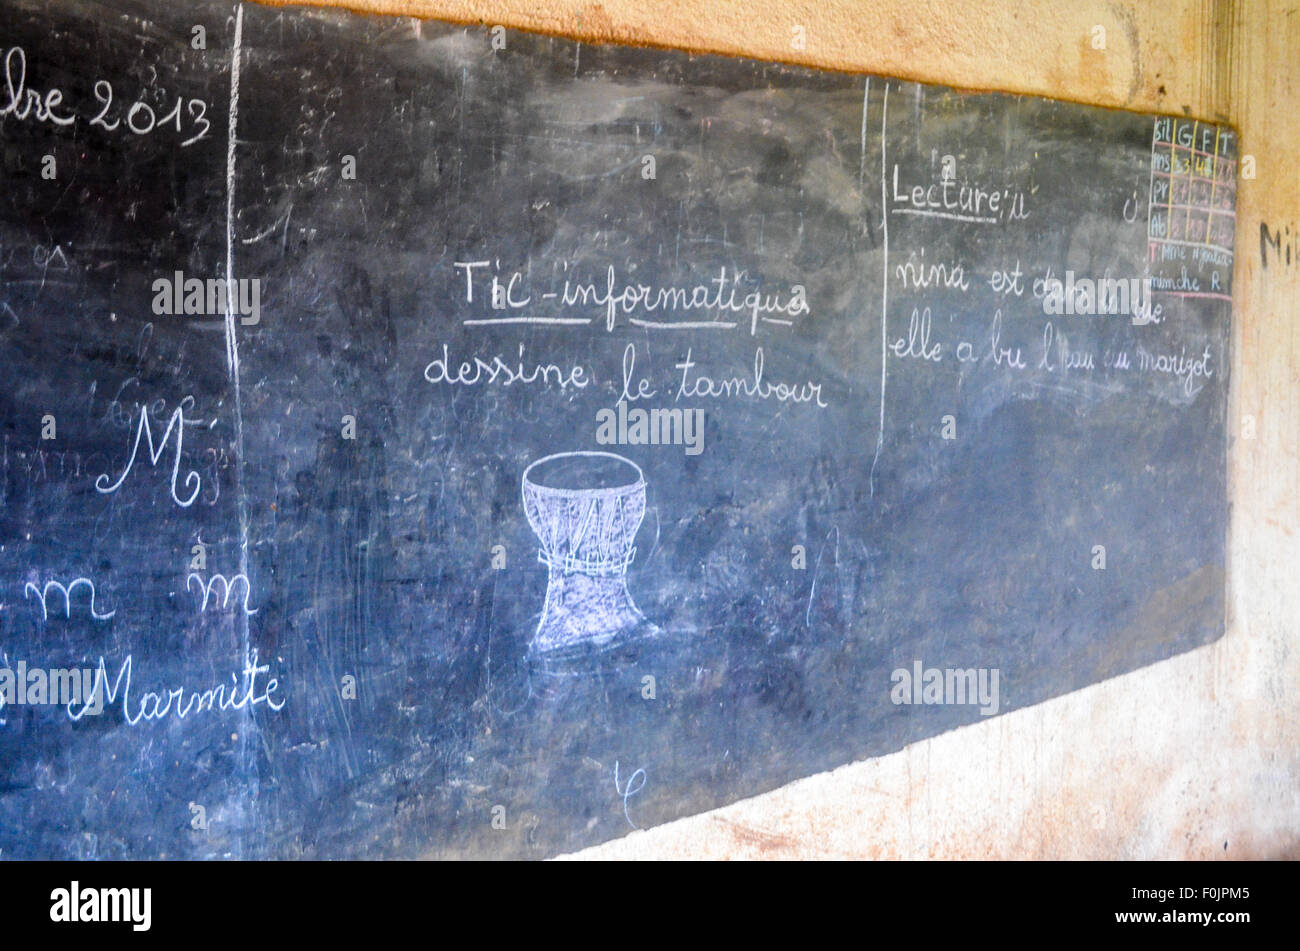 Black board in a rural African school showing a drum under the title 'ICT - Informatics' and asking students to draw the drum. Stock Photo